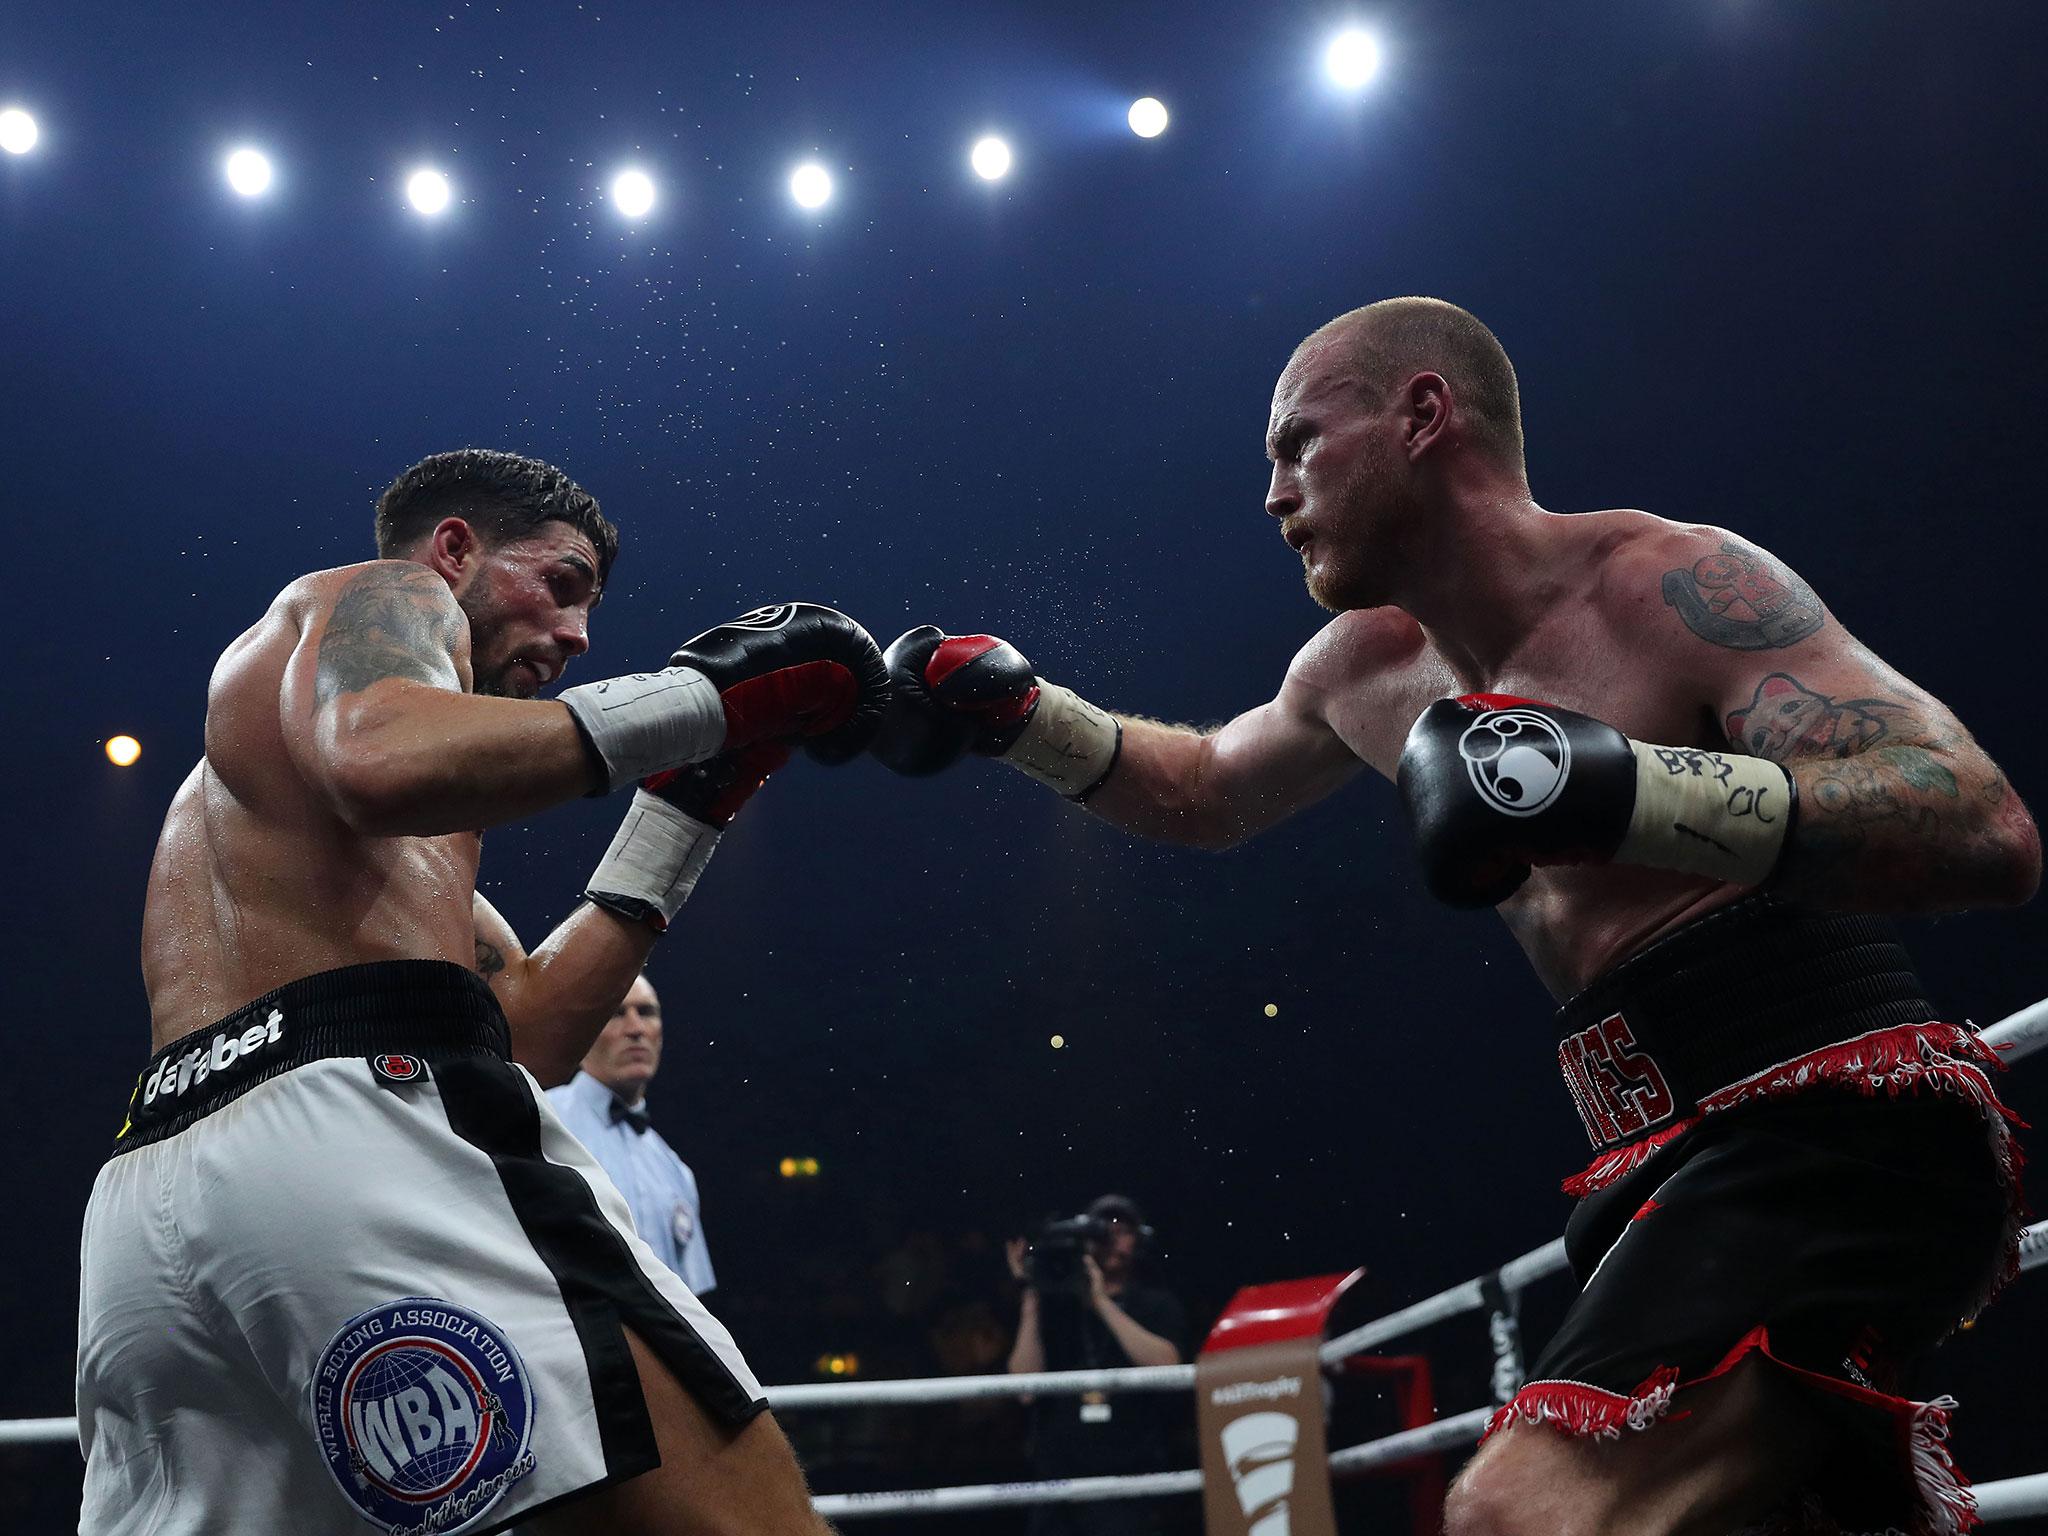 Groves won inside four rounds on Saturday night